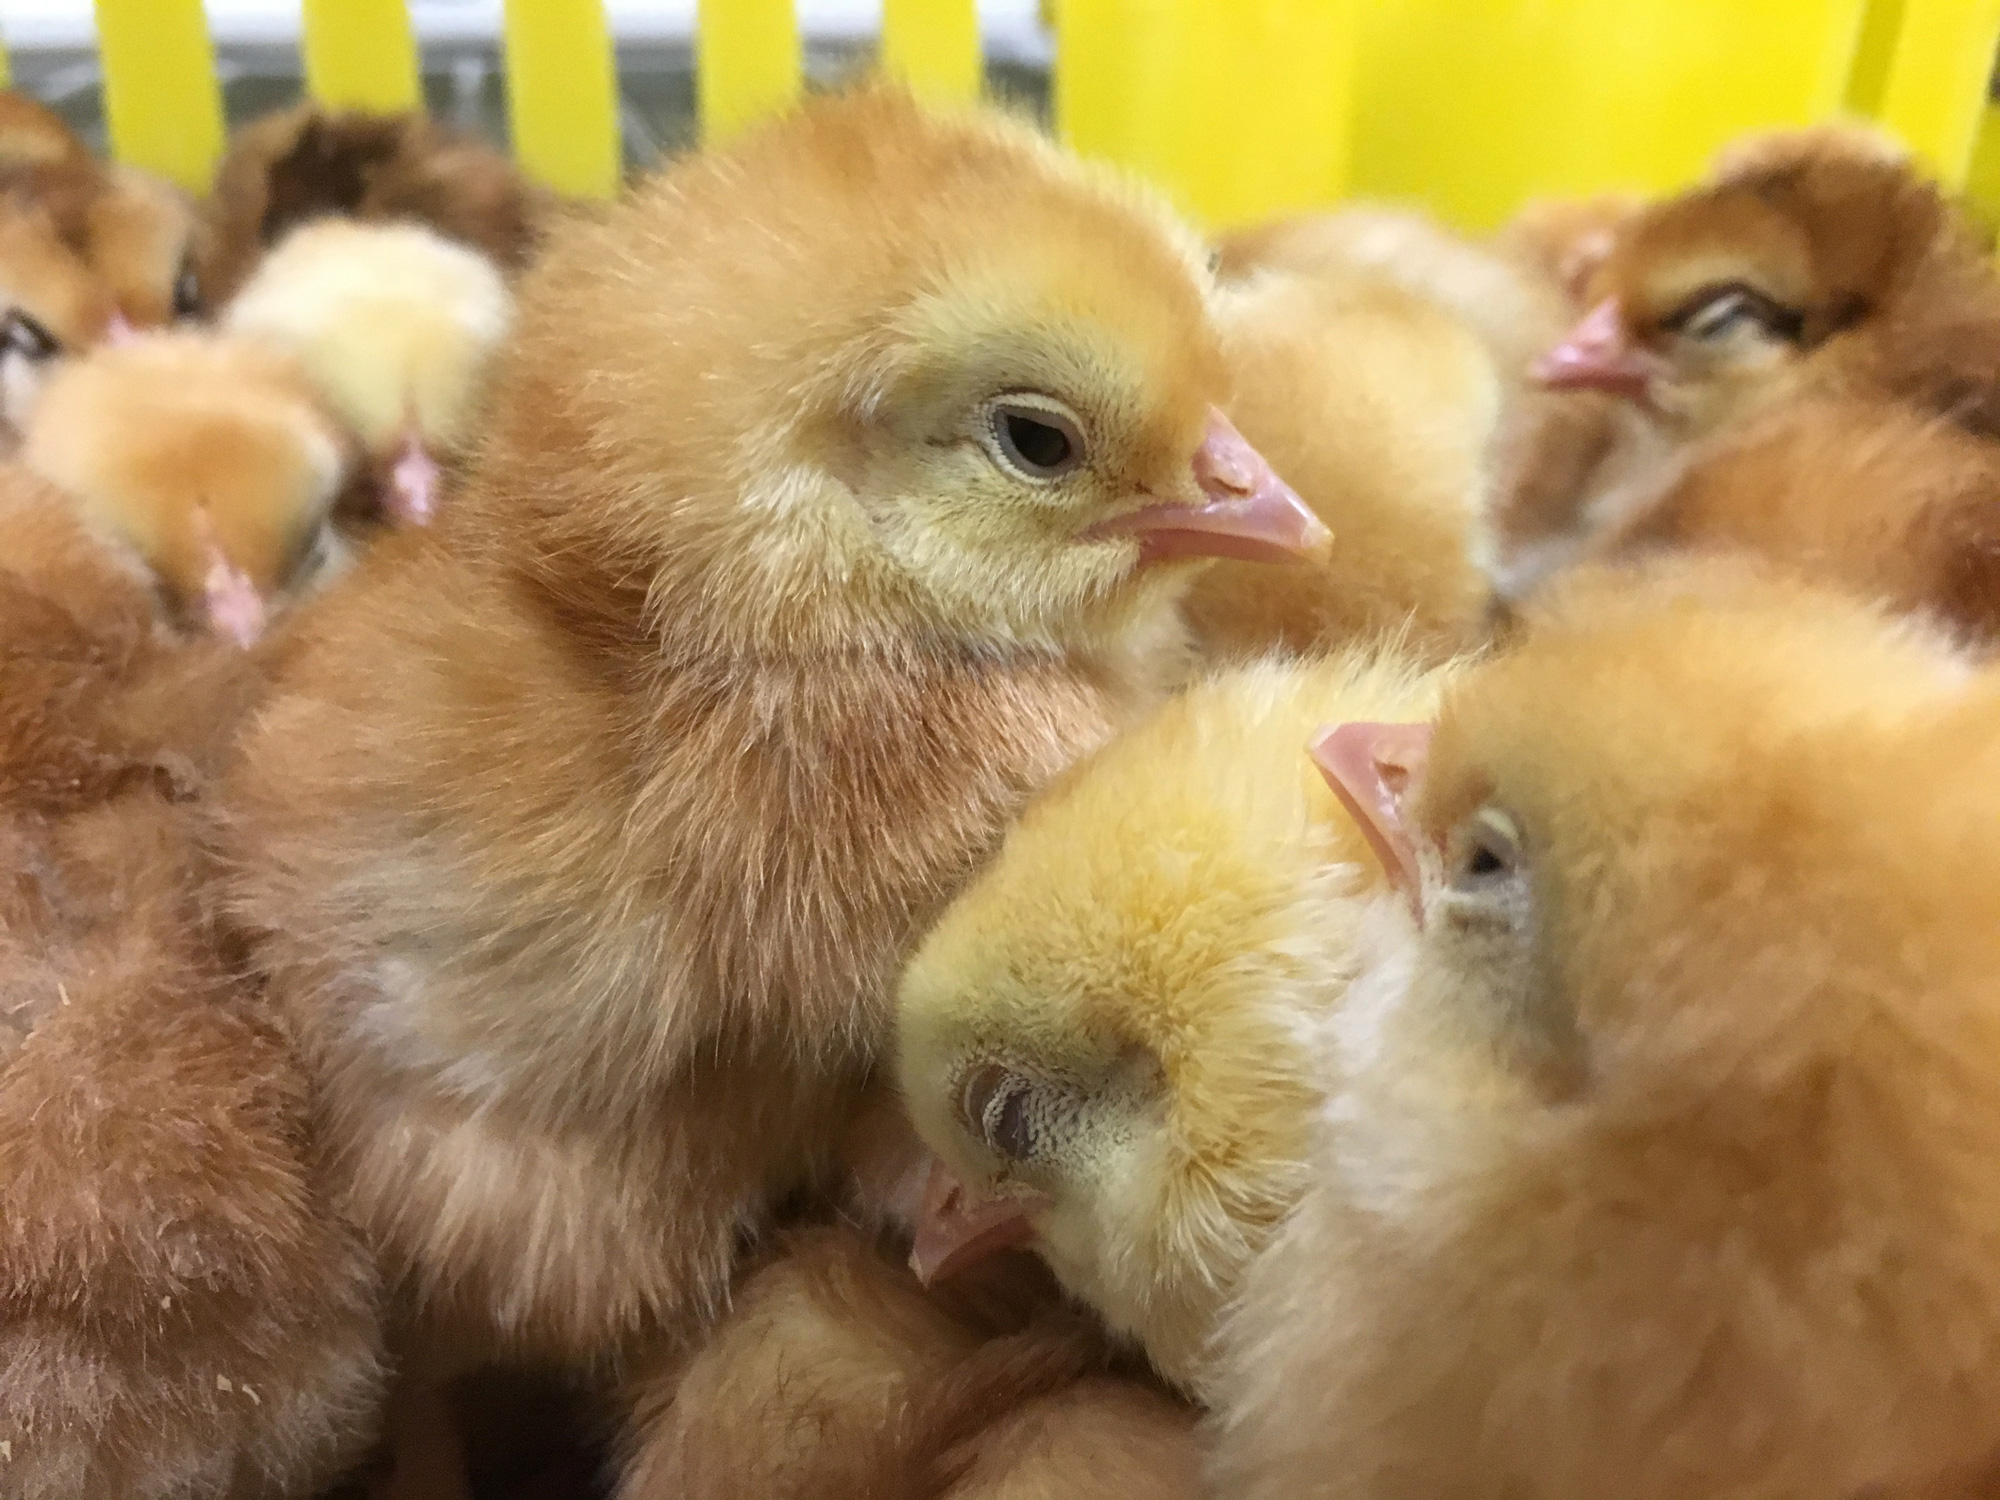 Getting Started With Your New Chicks